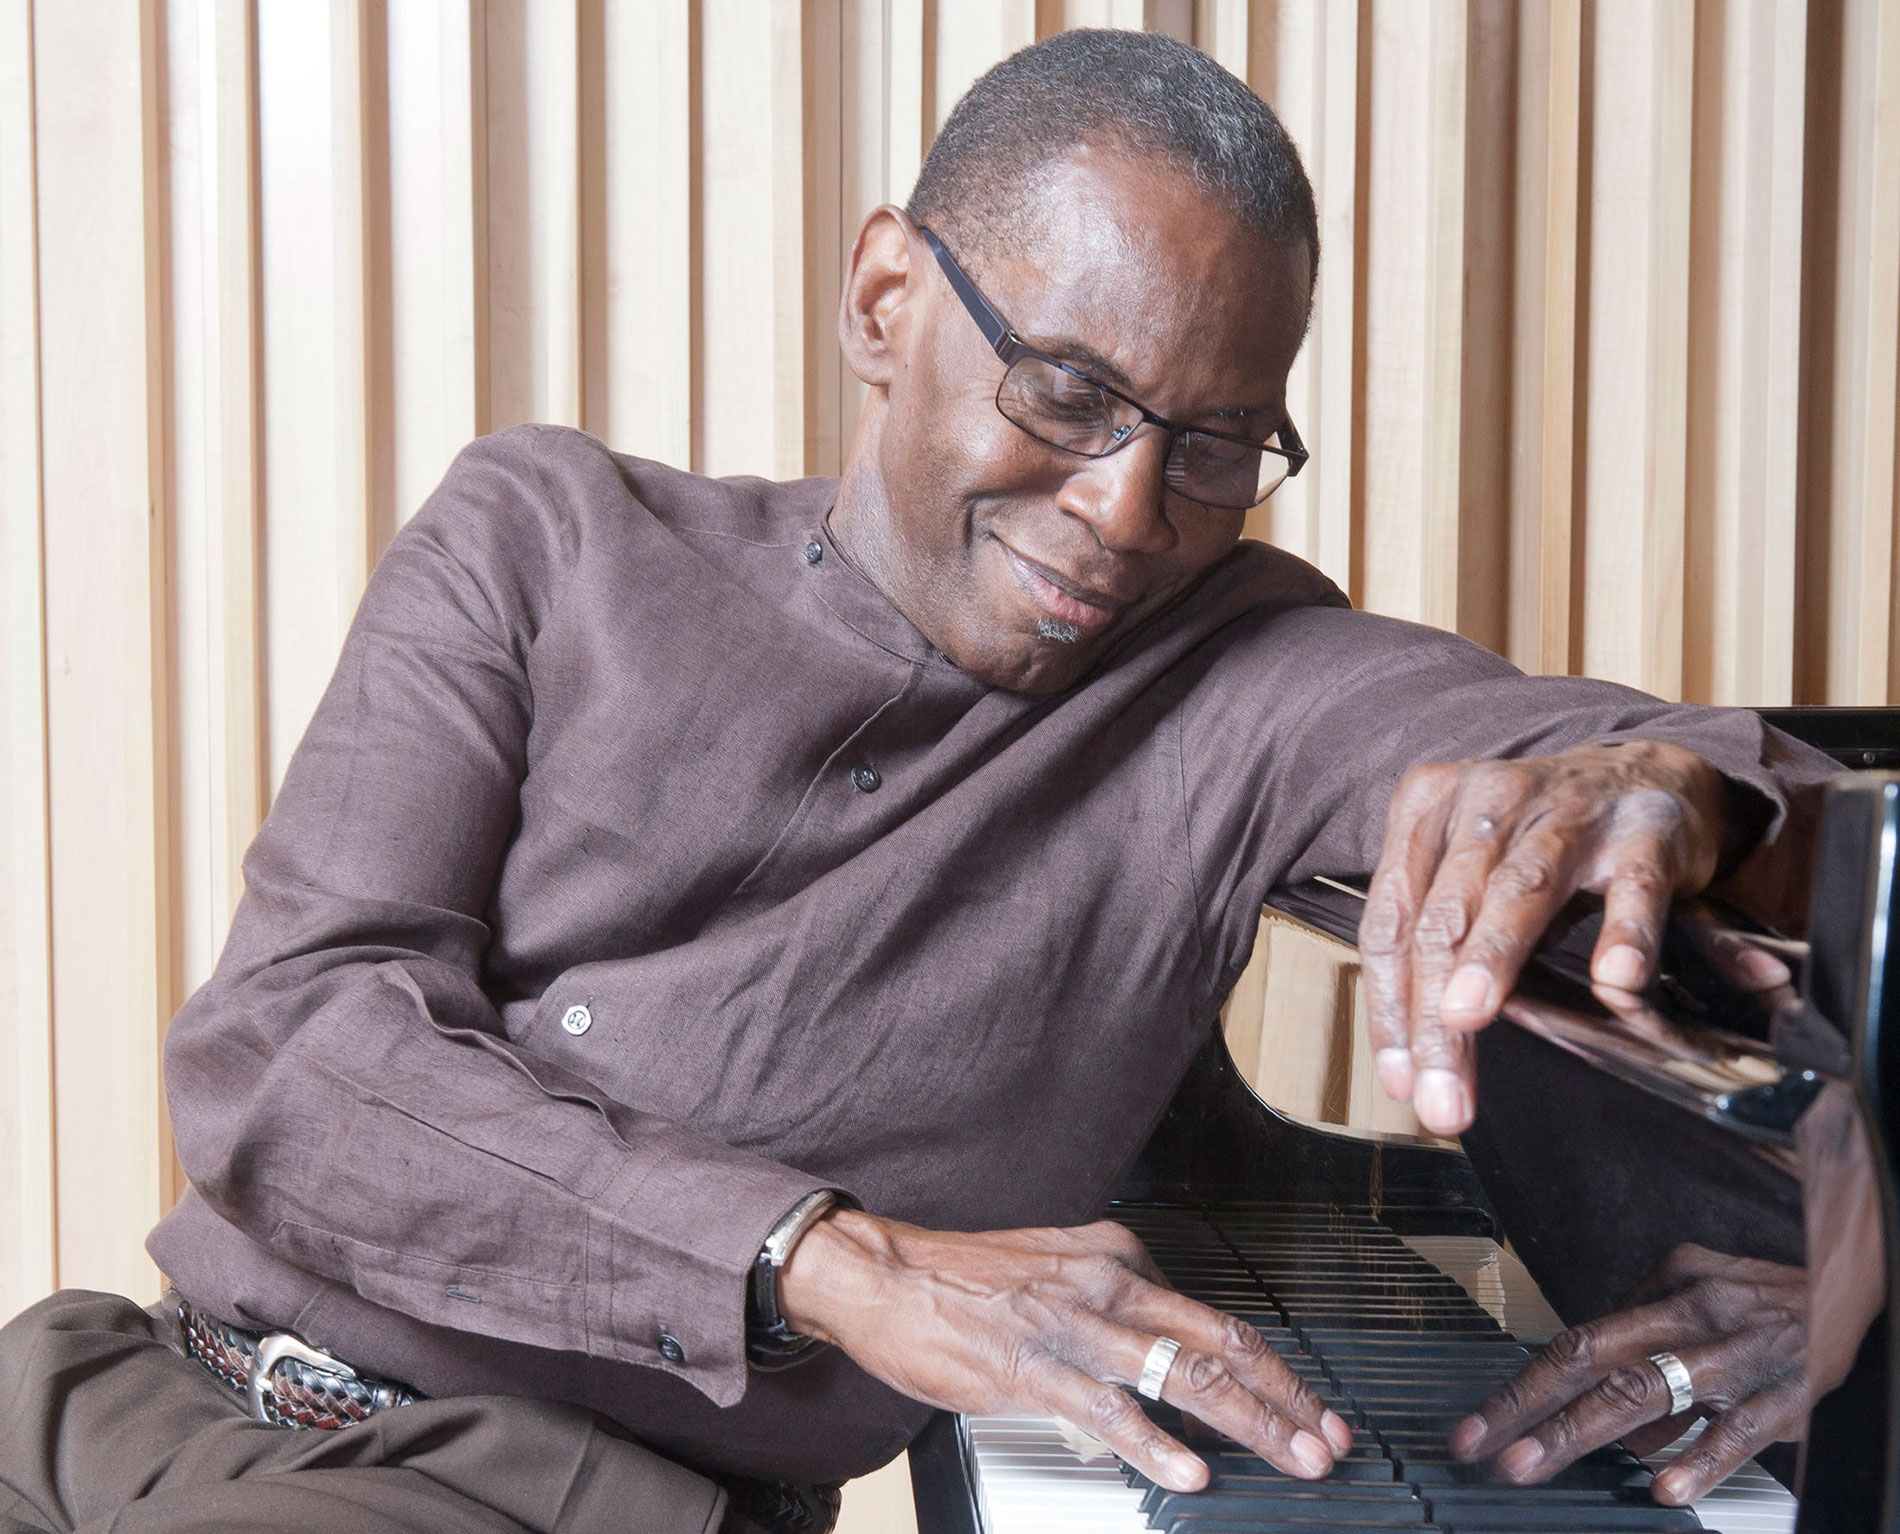 George cables